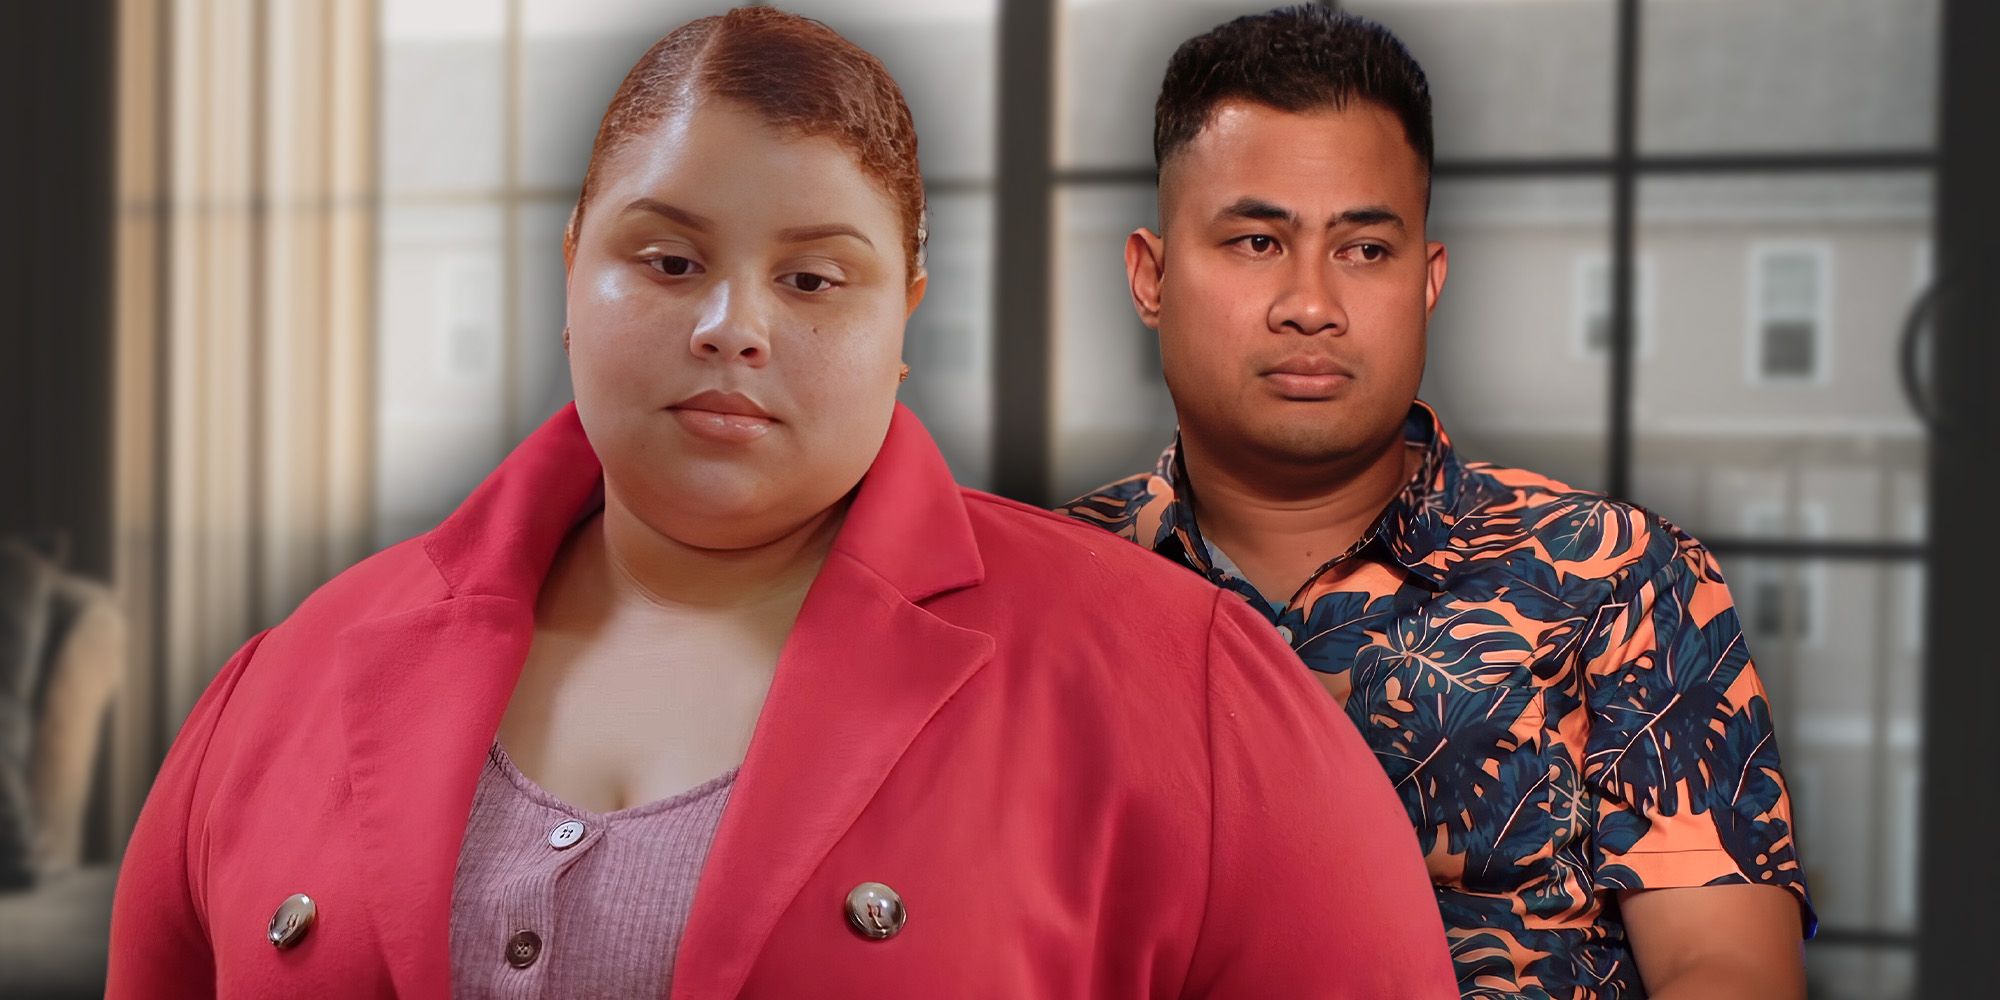 90 Day Fiancé's Asuelu Pulaa and Winter Everett looking serious